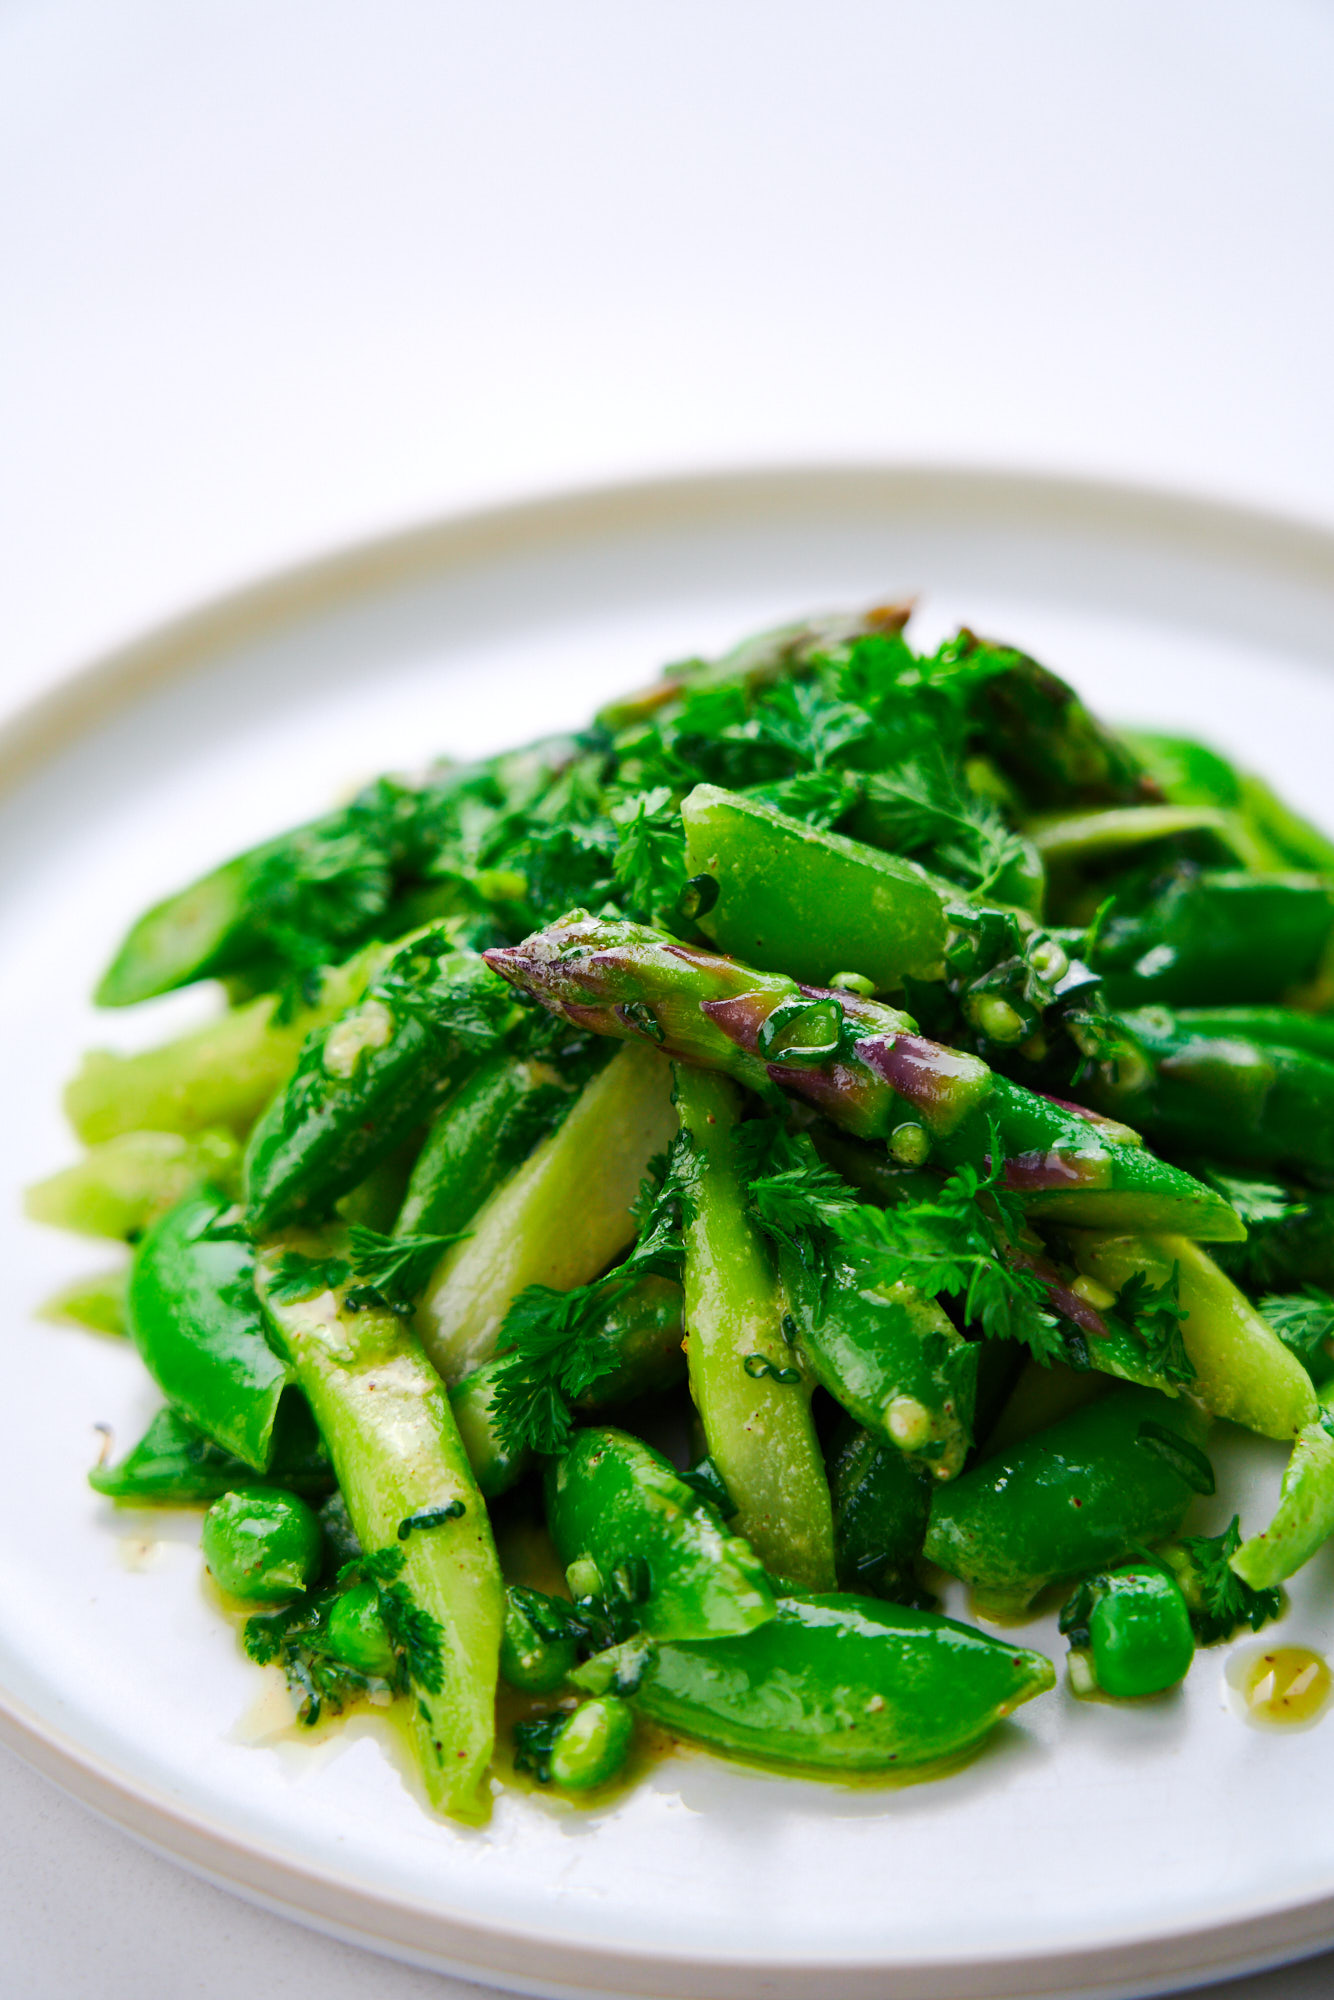 Delicious asparagus and snap pea salad with a sweet and tangy mustard vinaigrette.